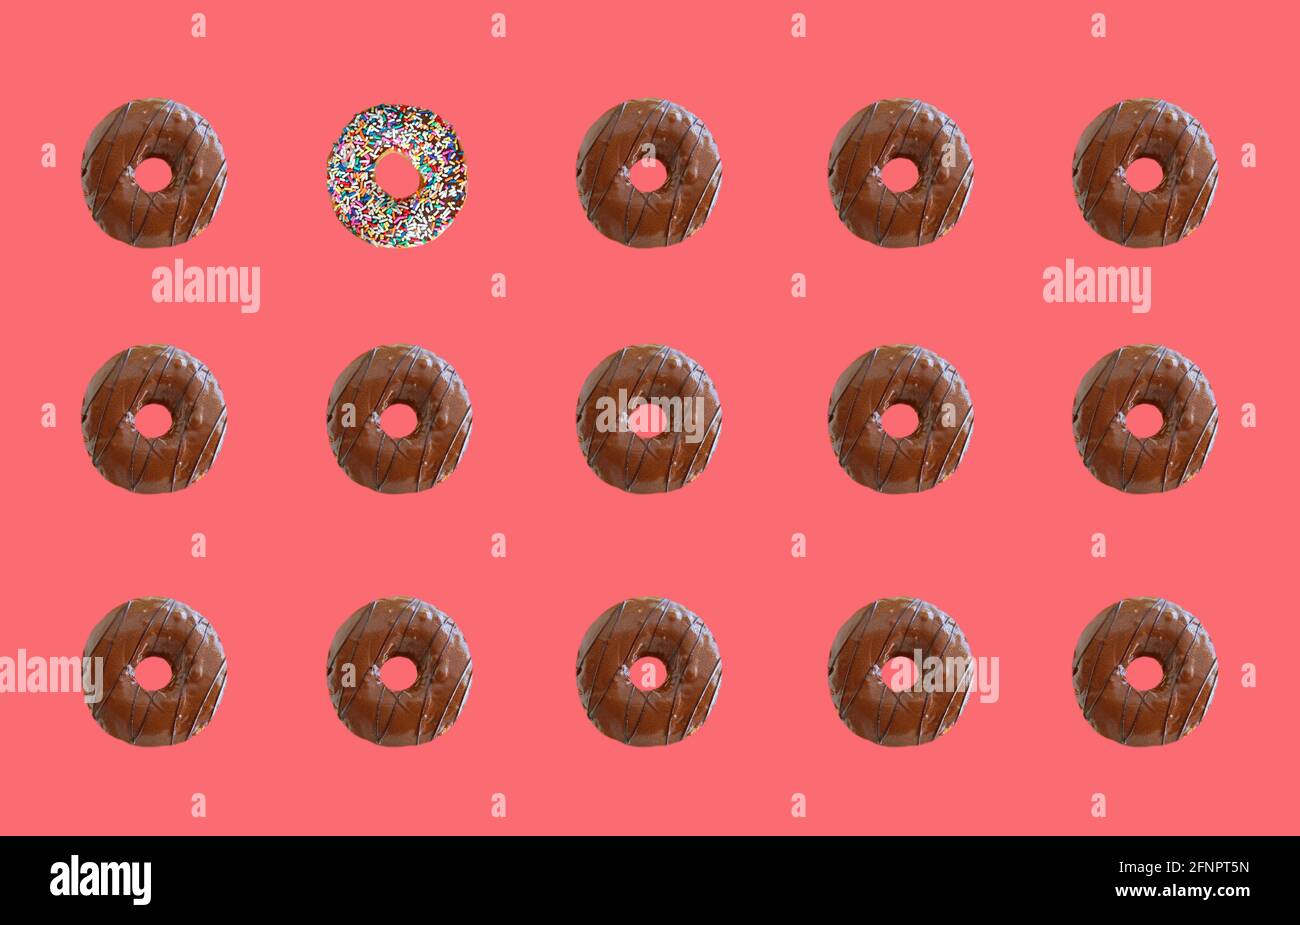 Rows of Chocolate Glazed Doughnuts Pattern on Coral Pink Background Stock Photo